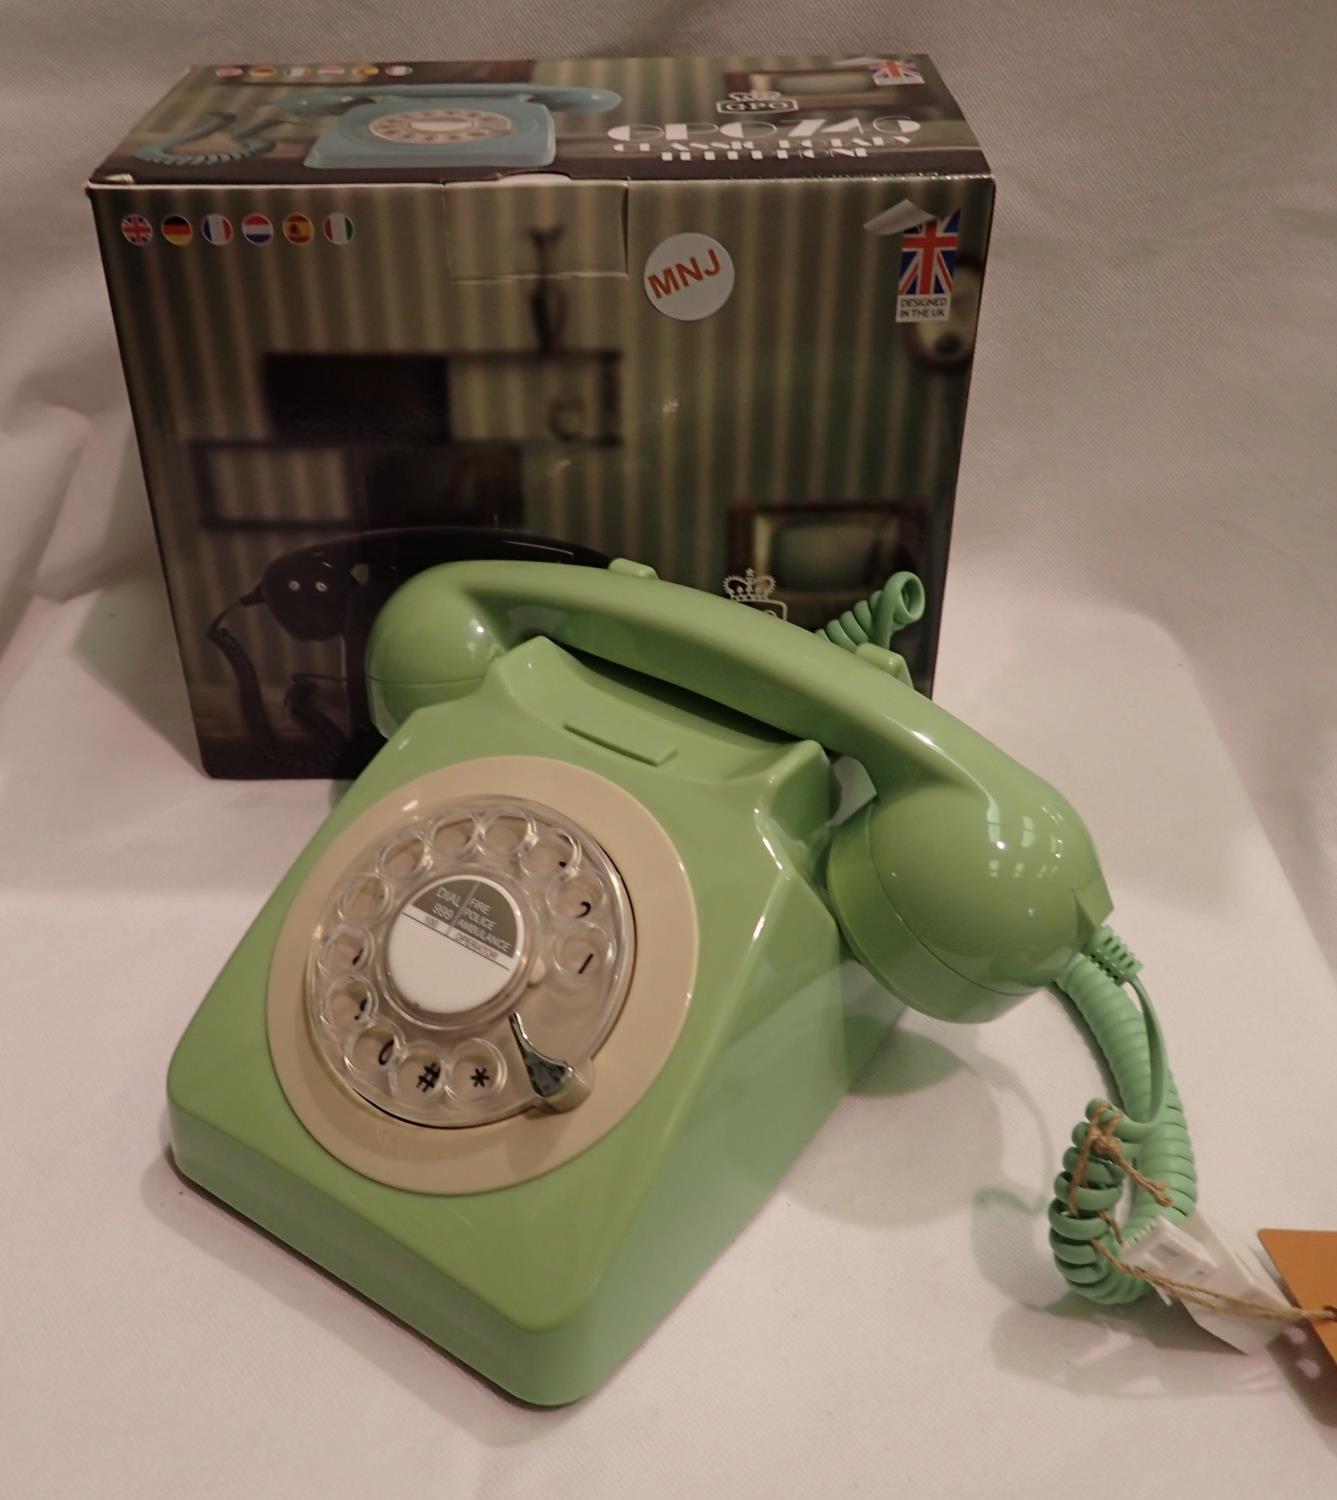 Mint green 1960/1970s style Rotary telephone, compatible with modern telephone banking and any